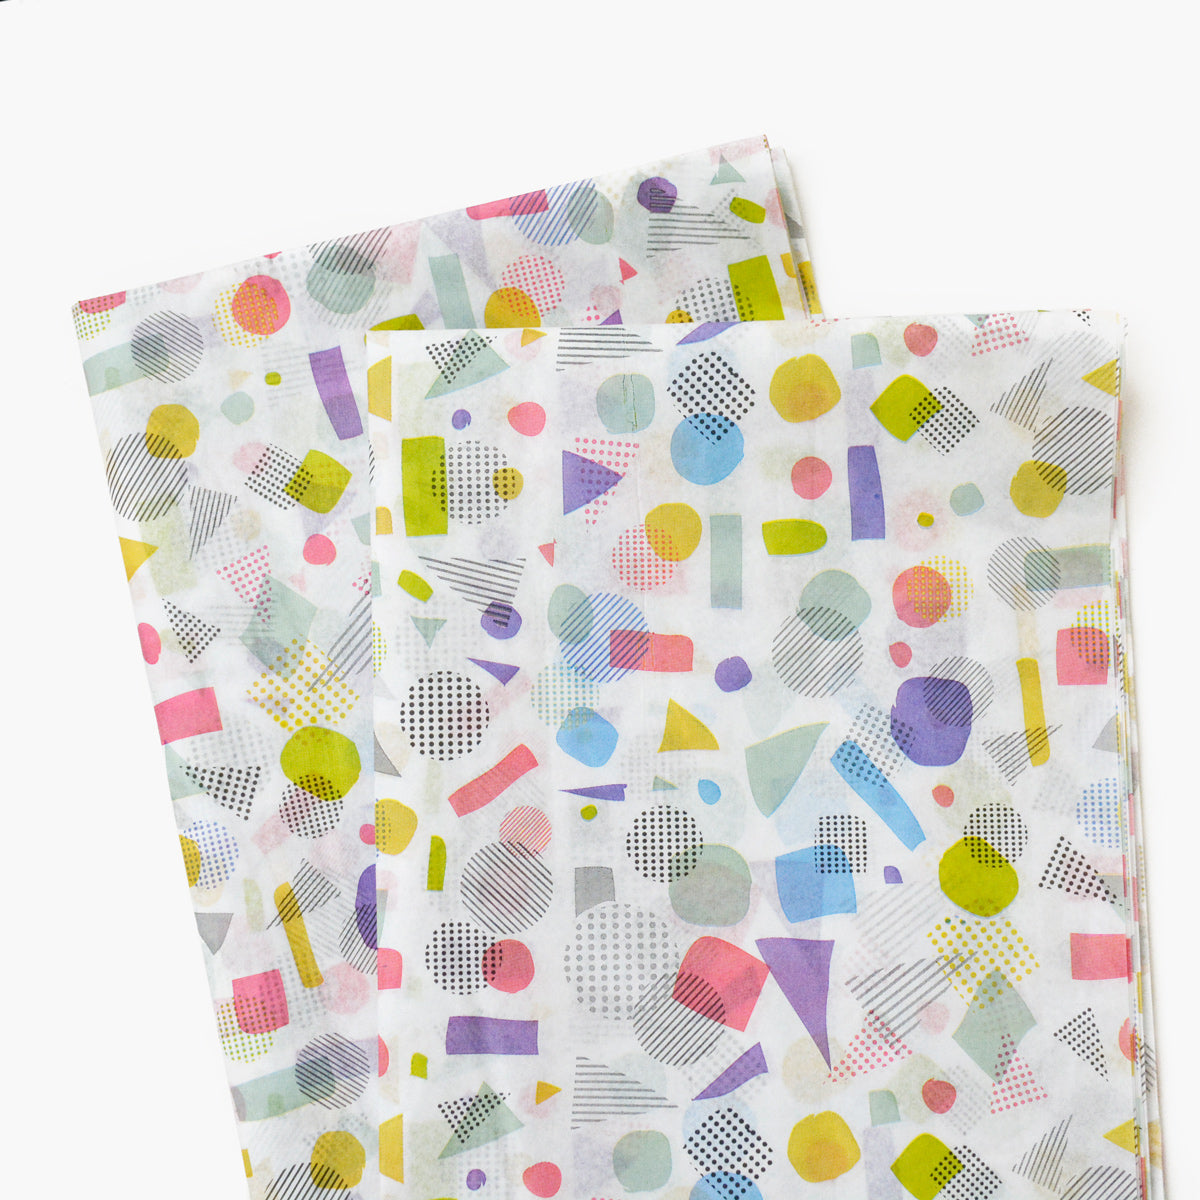 Bohemian Modern Patterns Collection. Wrapping Tissue Paper